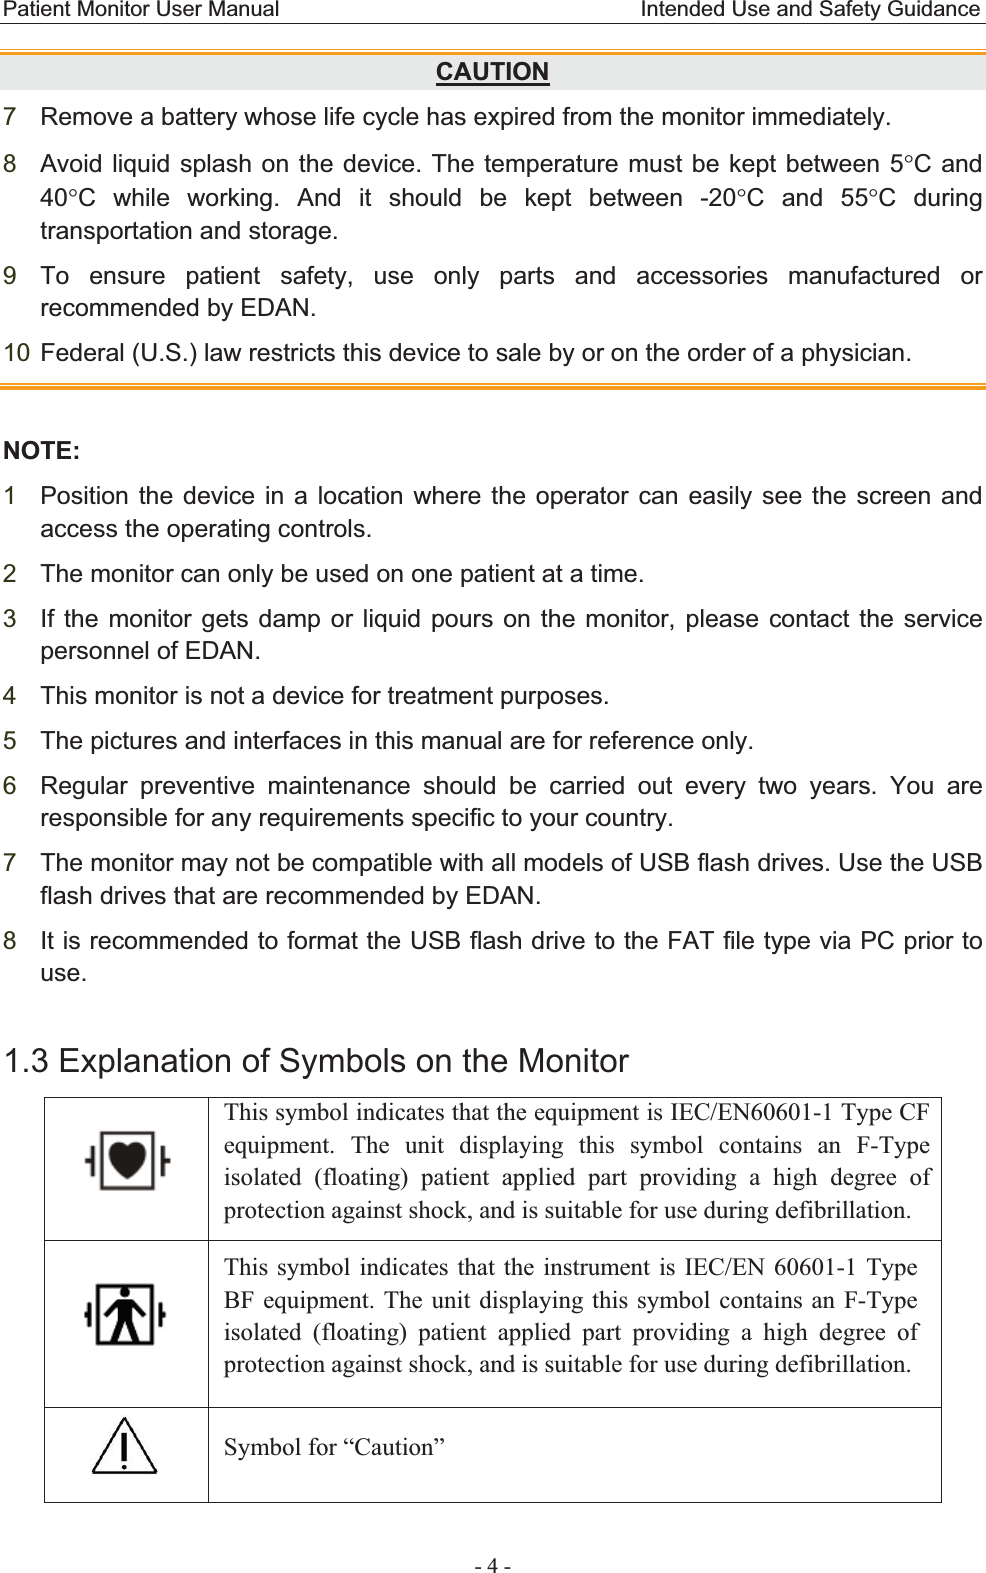 Patient Monitor User Manual                                 Intended Use and Safety Guidance  - 4 - CAUTION7Remove a battery whose life cycle has expired from the monitor immediately. 8Avoid liquid splash on the device. The temperature must be kept between 5qC and 40qC while working. And it should be kept between -20qC and 55qC during transportation and storage. 9To ensure patient safety, use only parts and accessories manufactured or recommended by EDAN. 10 Federal (U.S.) law restricts this device to sale by or on the order of a physician. NOTE:1Position the device in a location where the operator can easily see the screen and access the operating controls. 2The monitor can only be used on one patient at a time.   3If the monitor gets damp or liquid pours on the monitor, please contact the service personnel of EDAN. 4This monitor is not a device for treatment purposes. 5The pictures and interfaces in this manual are for reference only. 6Regular preventive maintenance should be carried out every two years. You are responsible for any requirements specific to your country. 7The monitor may not be compatible with all models of USB flash drives. Use the USB flash drives that are recommended by EDAN. 8It is recommended to format the USB flash drive to the FAT file type via PC prior to use.1.3 Explanation of Symbols on the Monitor This symbol indicates that the equipment is IEC/EN60601-1 Type CF equipment. The unit displaying this symbol contains an F-Type isolated (floating) patient applied part providing a high degree of protection against shock, and is suitable for use during defibrillation.  This symbol indicates that the instrument is IEC/EN 60601-1 Type BF equipment. The unit displaying this symbol contains an F-Type isolated (floating) patient applied part providing a high degree of protection against shock, and is suitable for use during defibrillation.  Symbol for “Caution” 